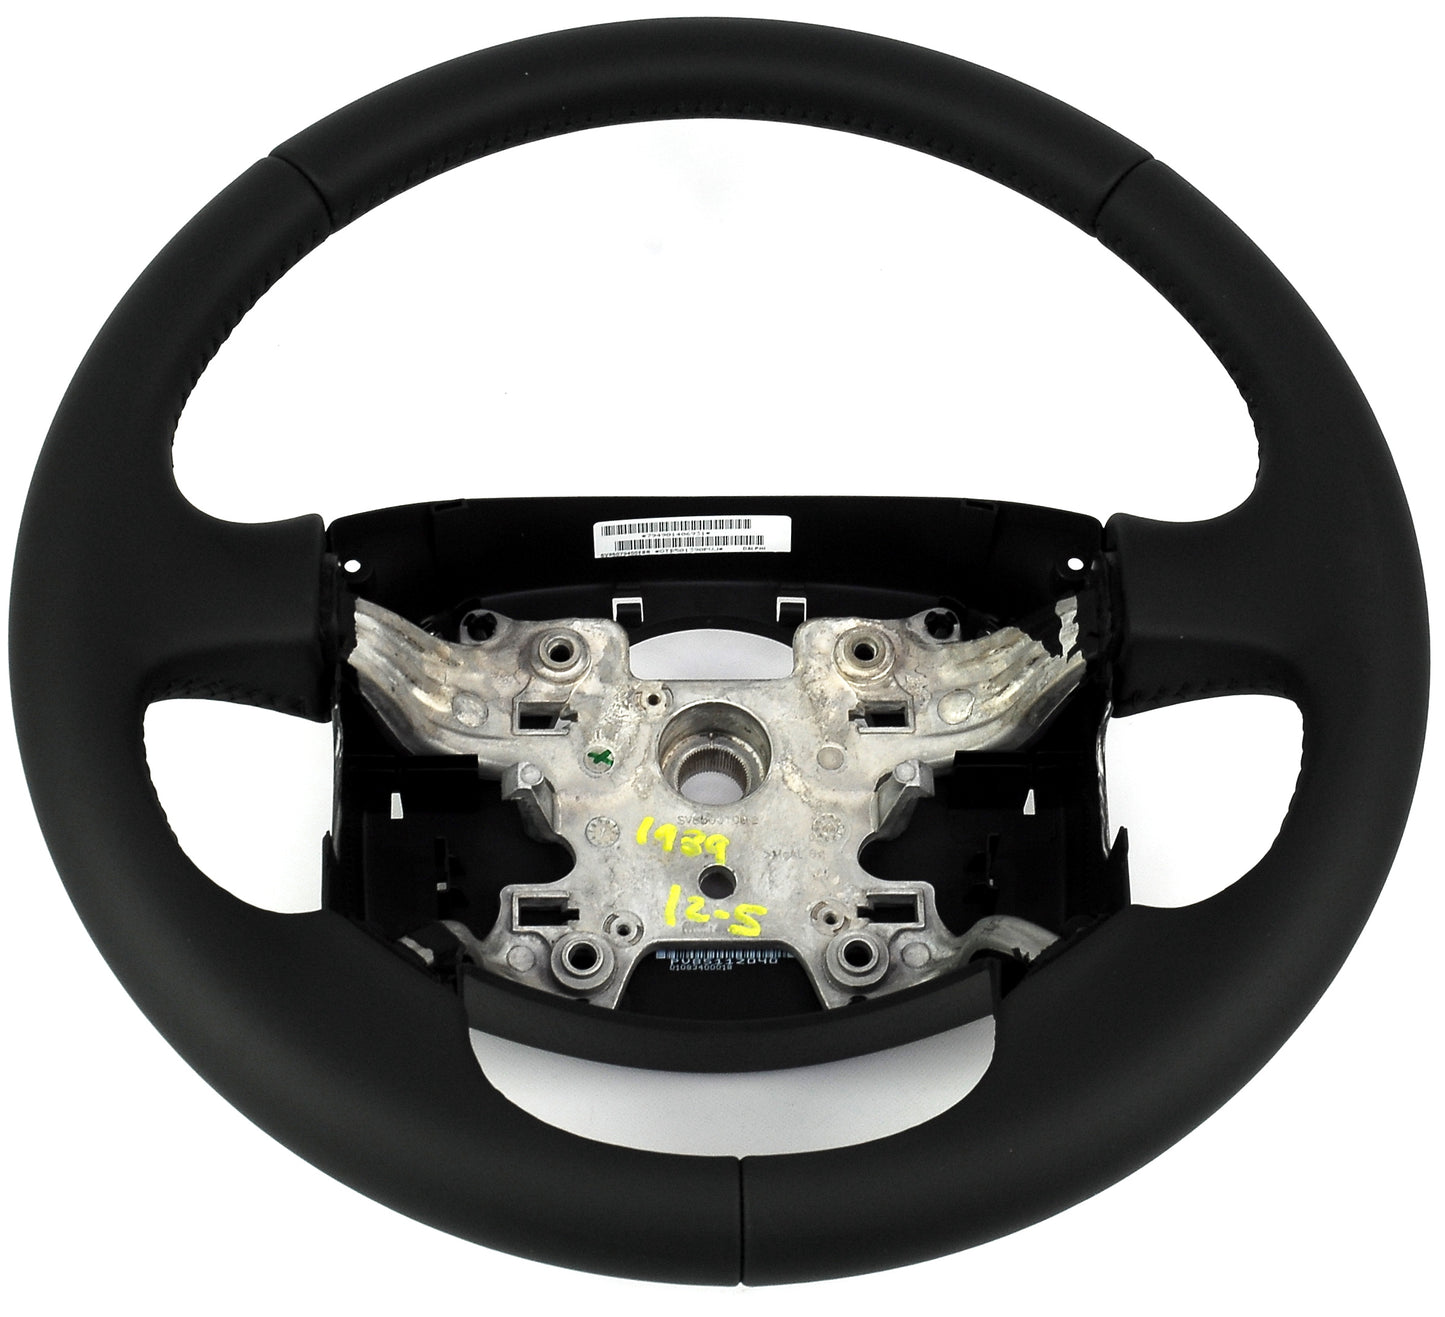 Soft Leather Steering Wheel - Outright for Range Rover Sport Genuine